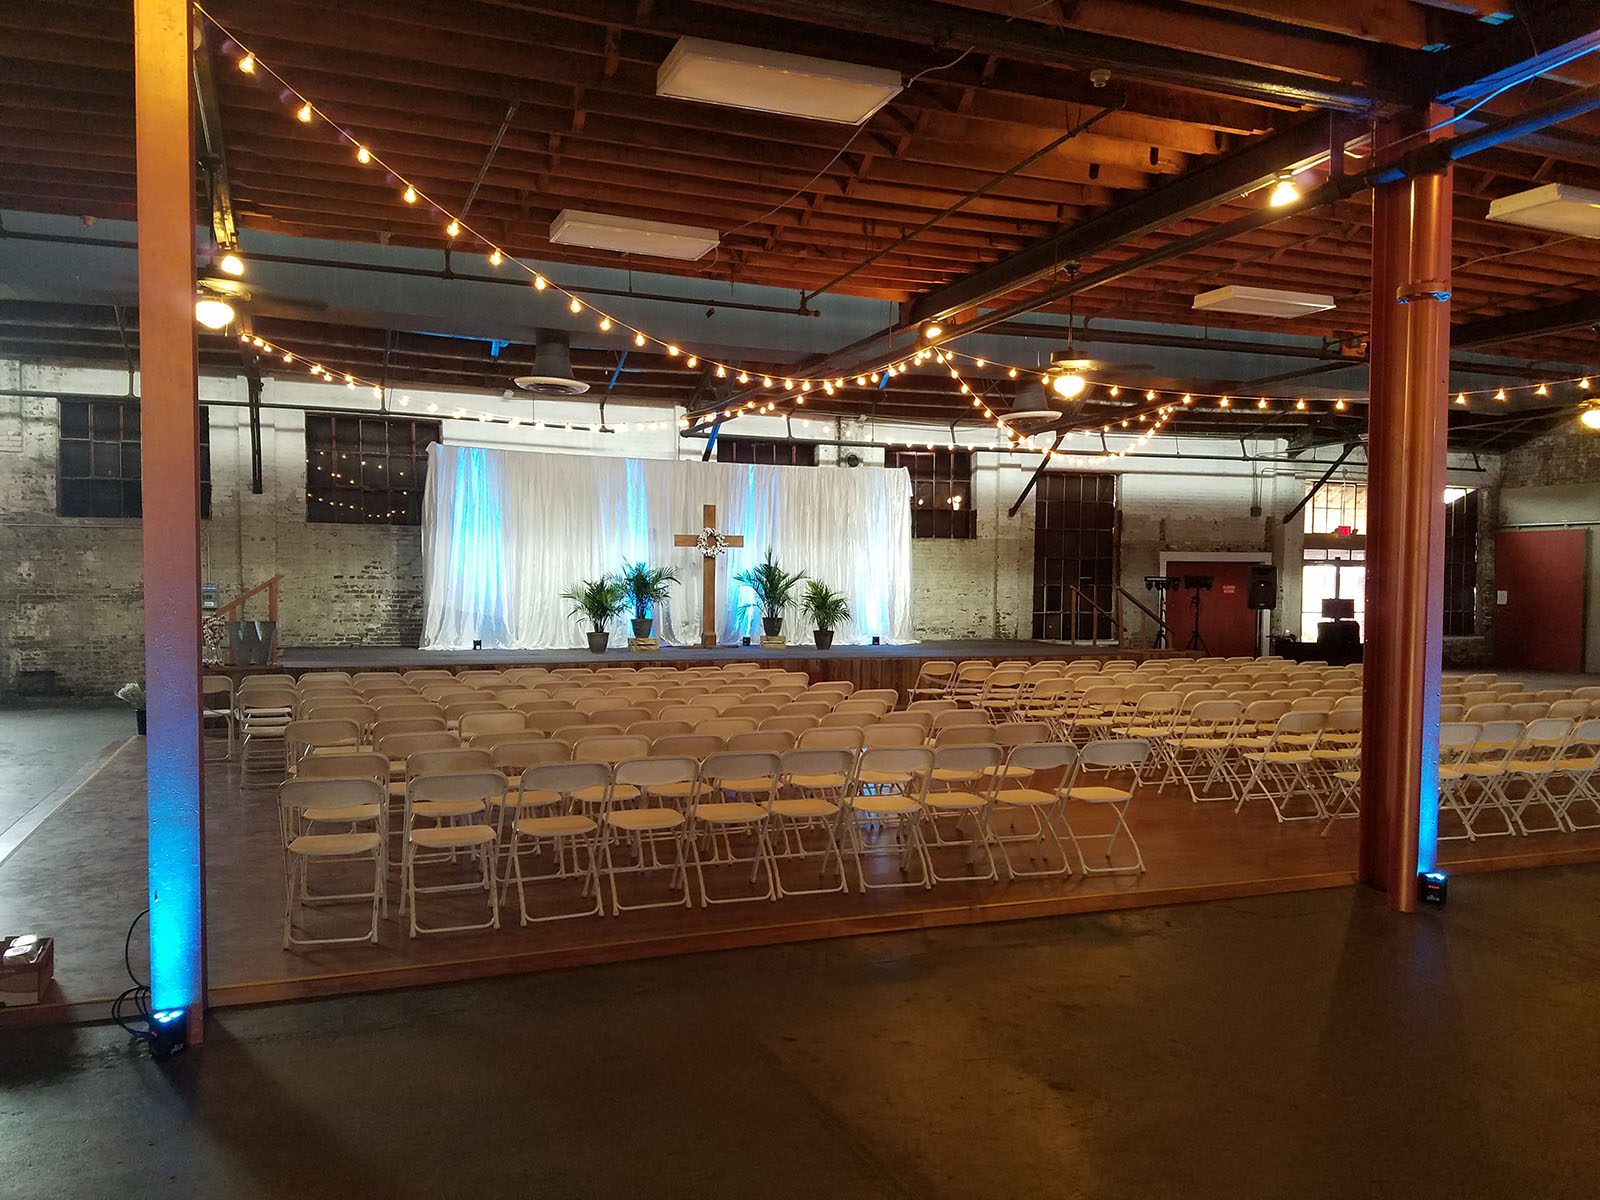 Nashville TN lighting rental and wedding decor rental from FADDs Events